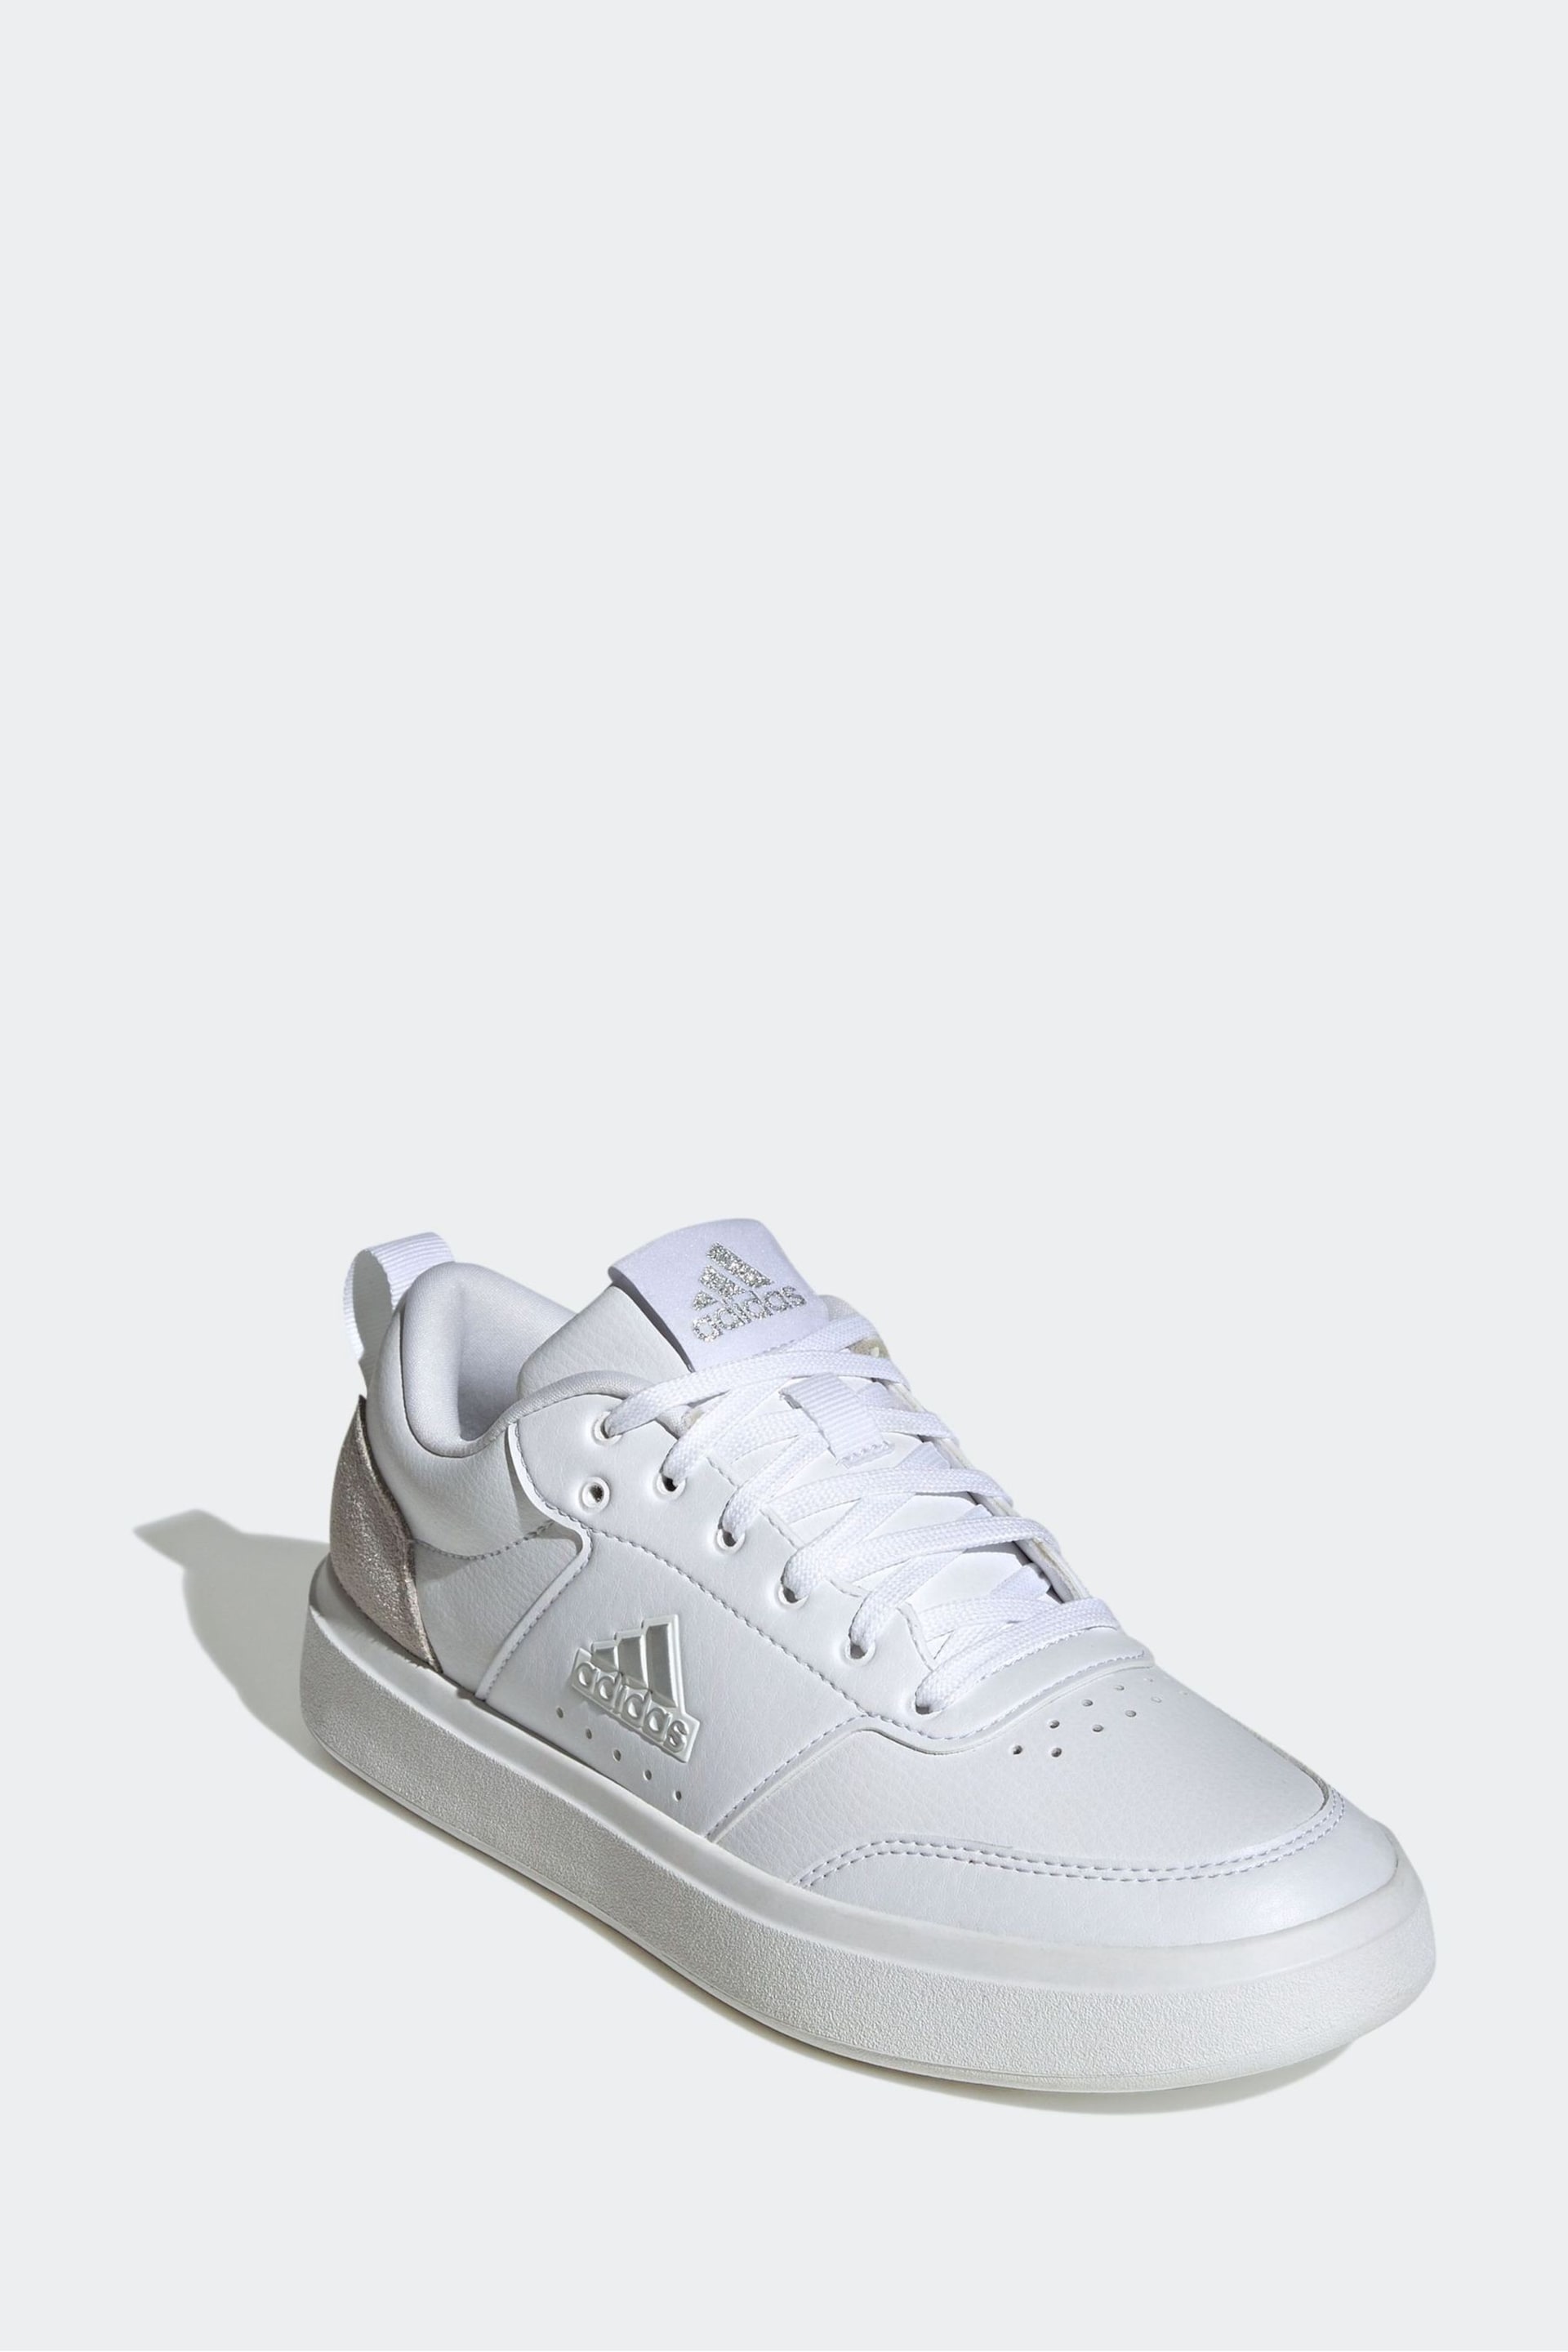 adidas White/Silver Sportswear Park Street Trainers - Image 3 of 9